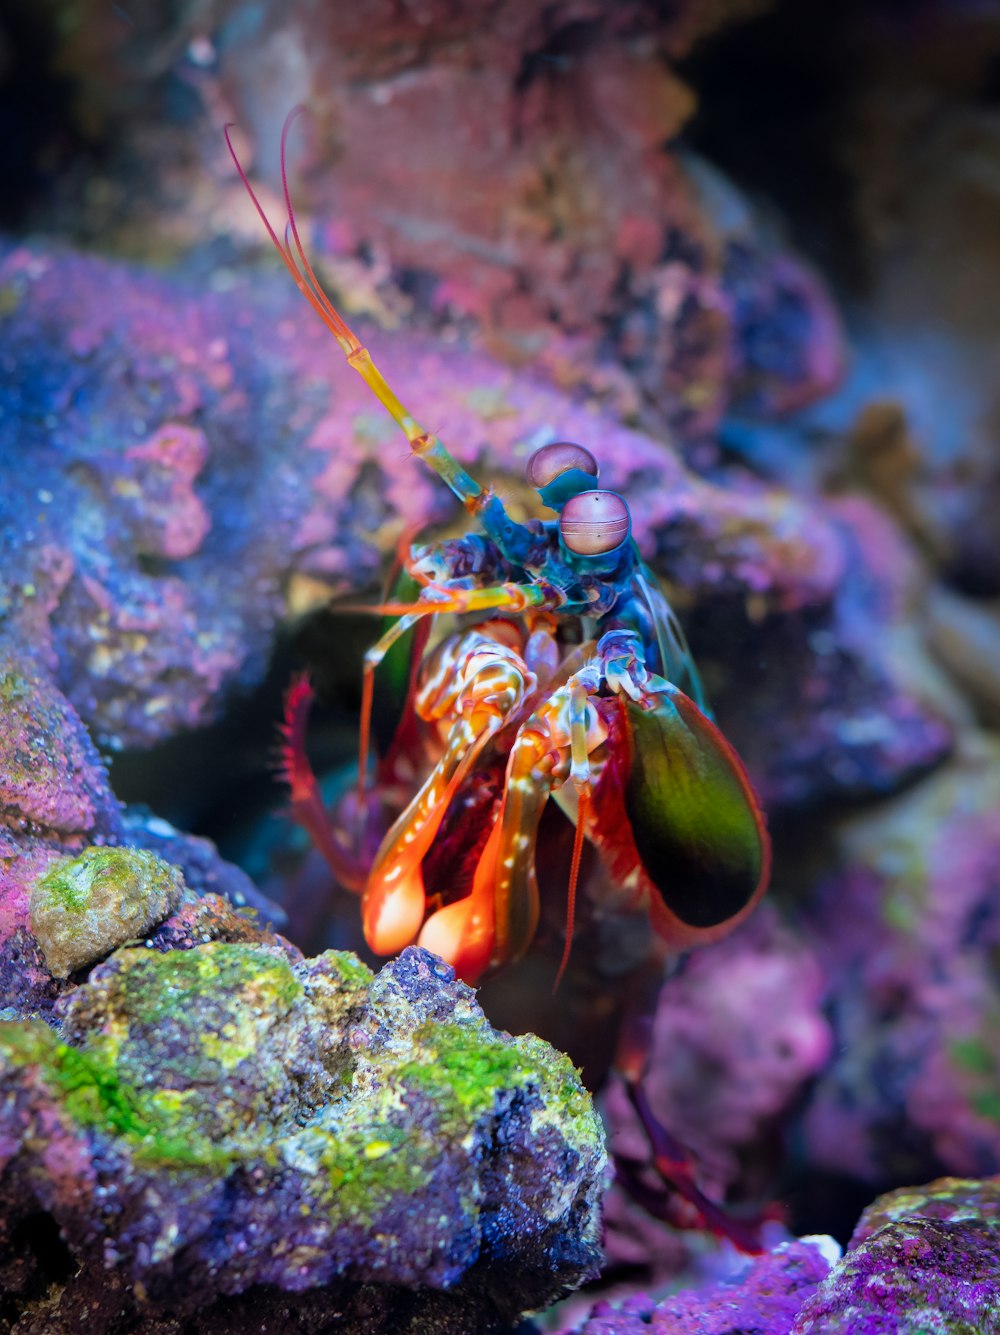 a close up of a colorful fish on a rock